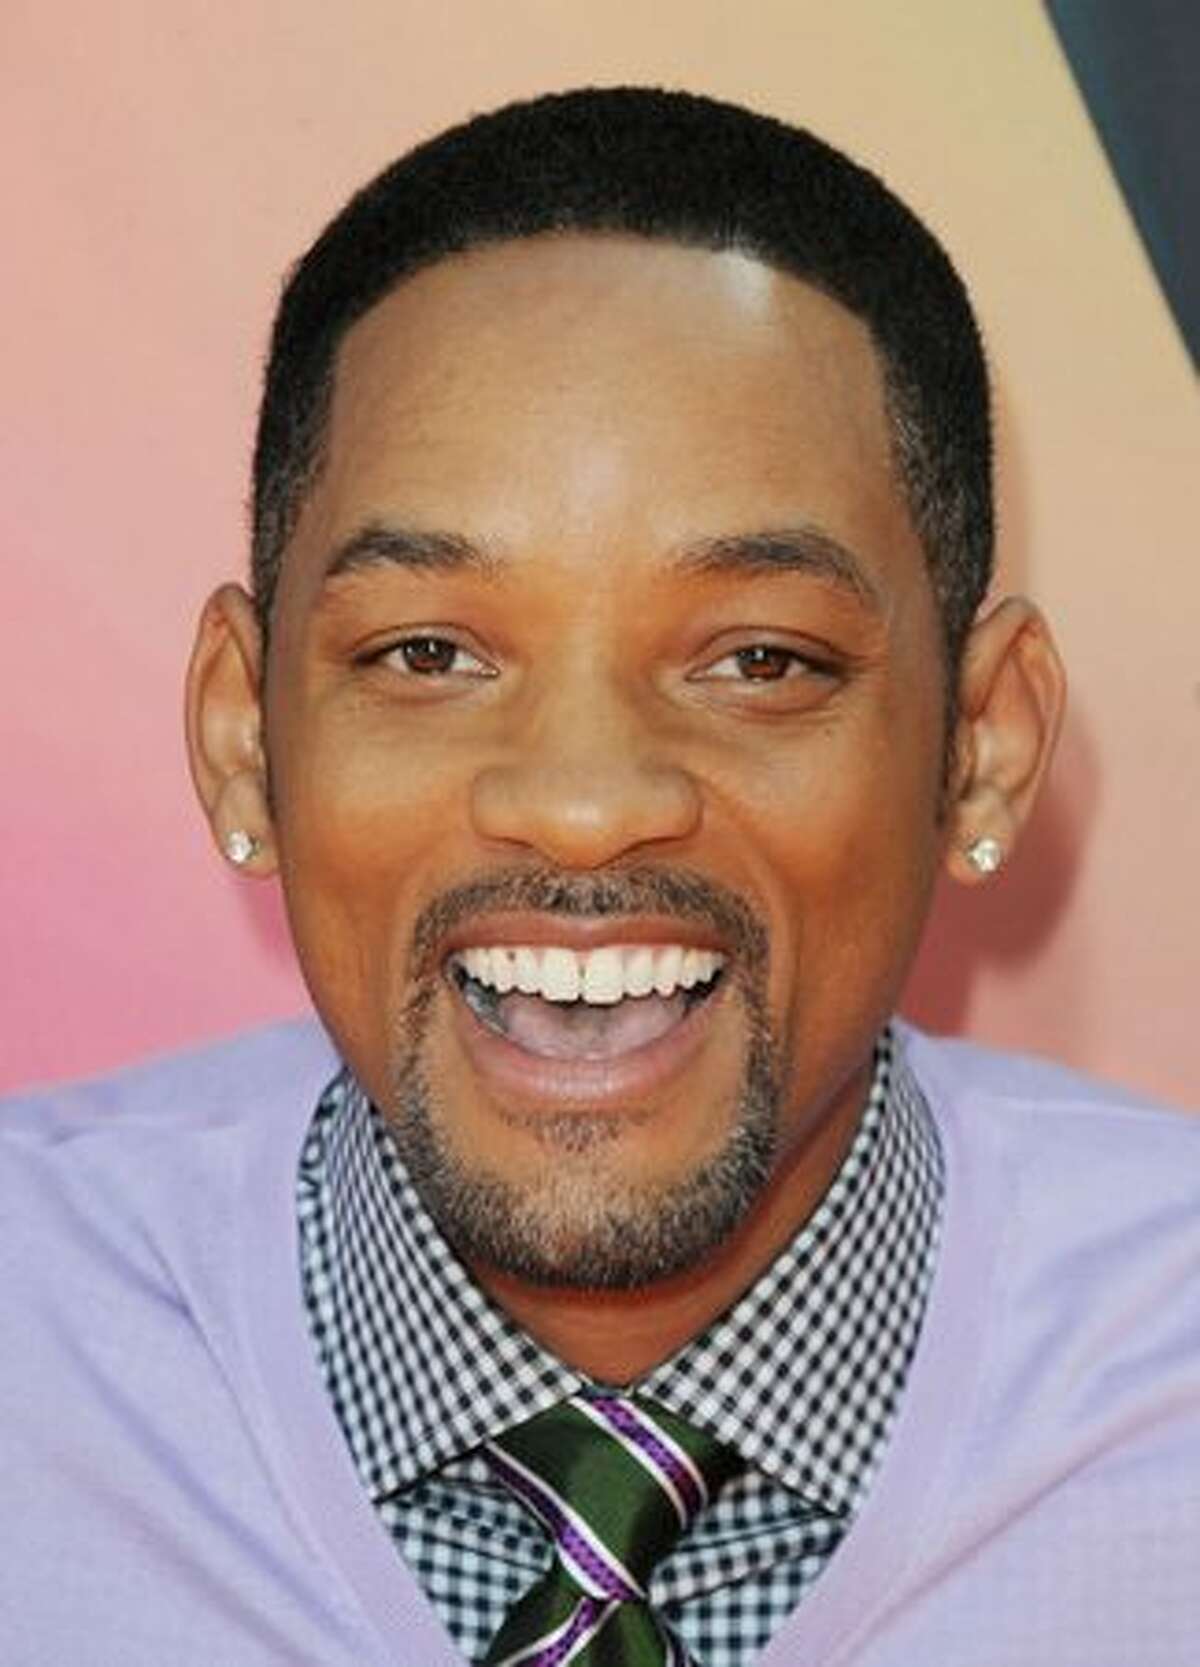 Actor Will Smith arrives at Nickelodeon's 23rd Annual Kids' Choice Awards held at UCLA's Pauley Pavilion in Los Angeles on March 27, 2010.